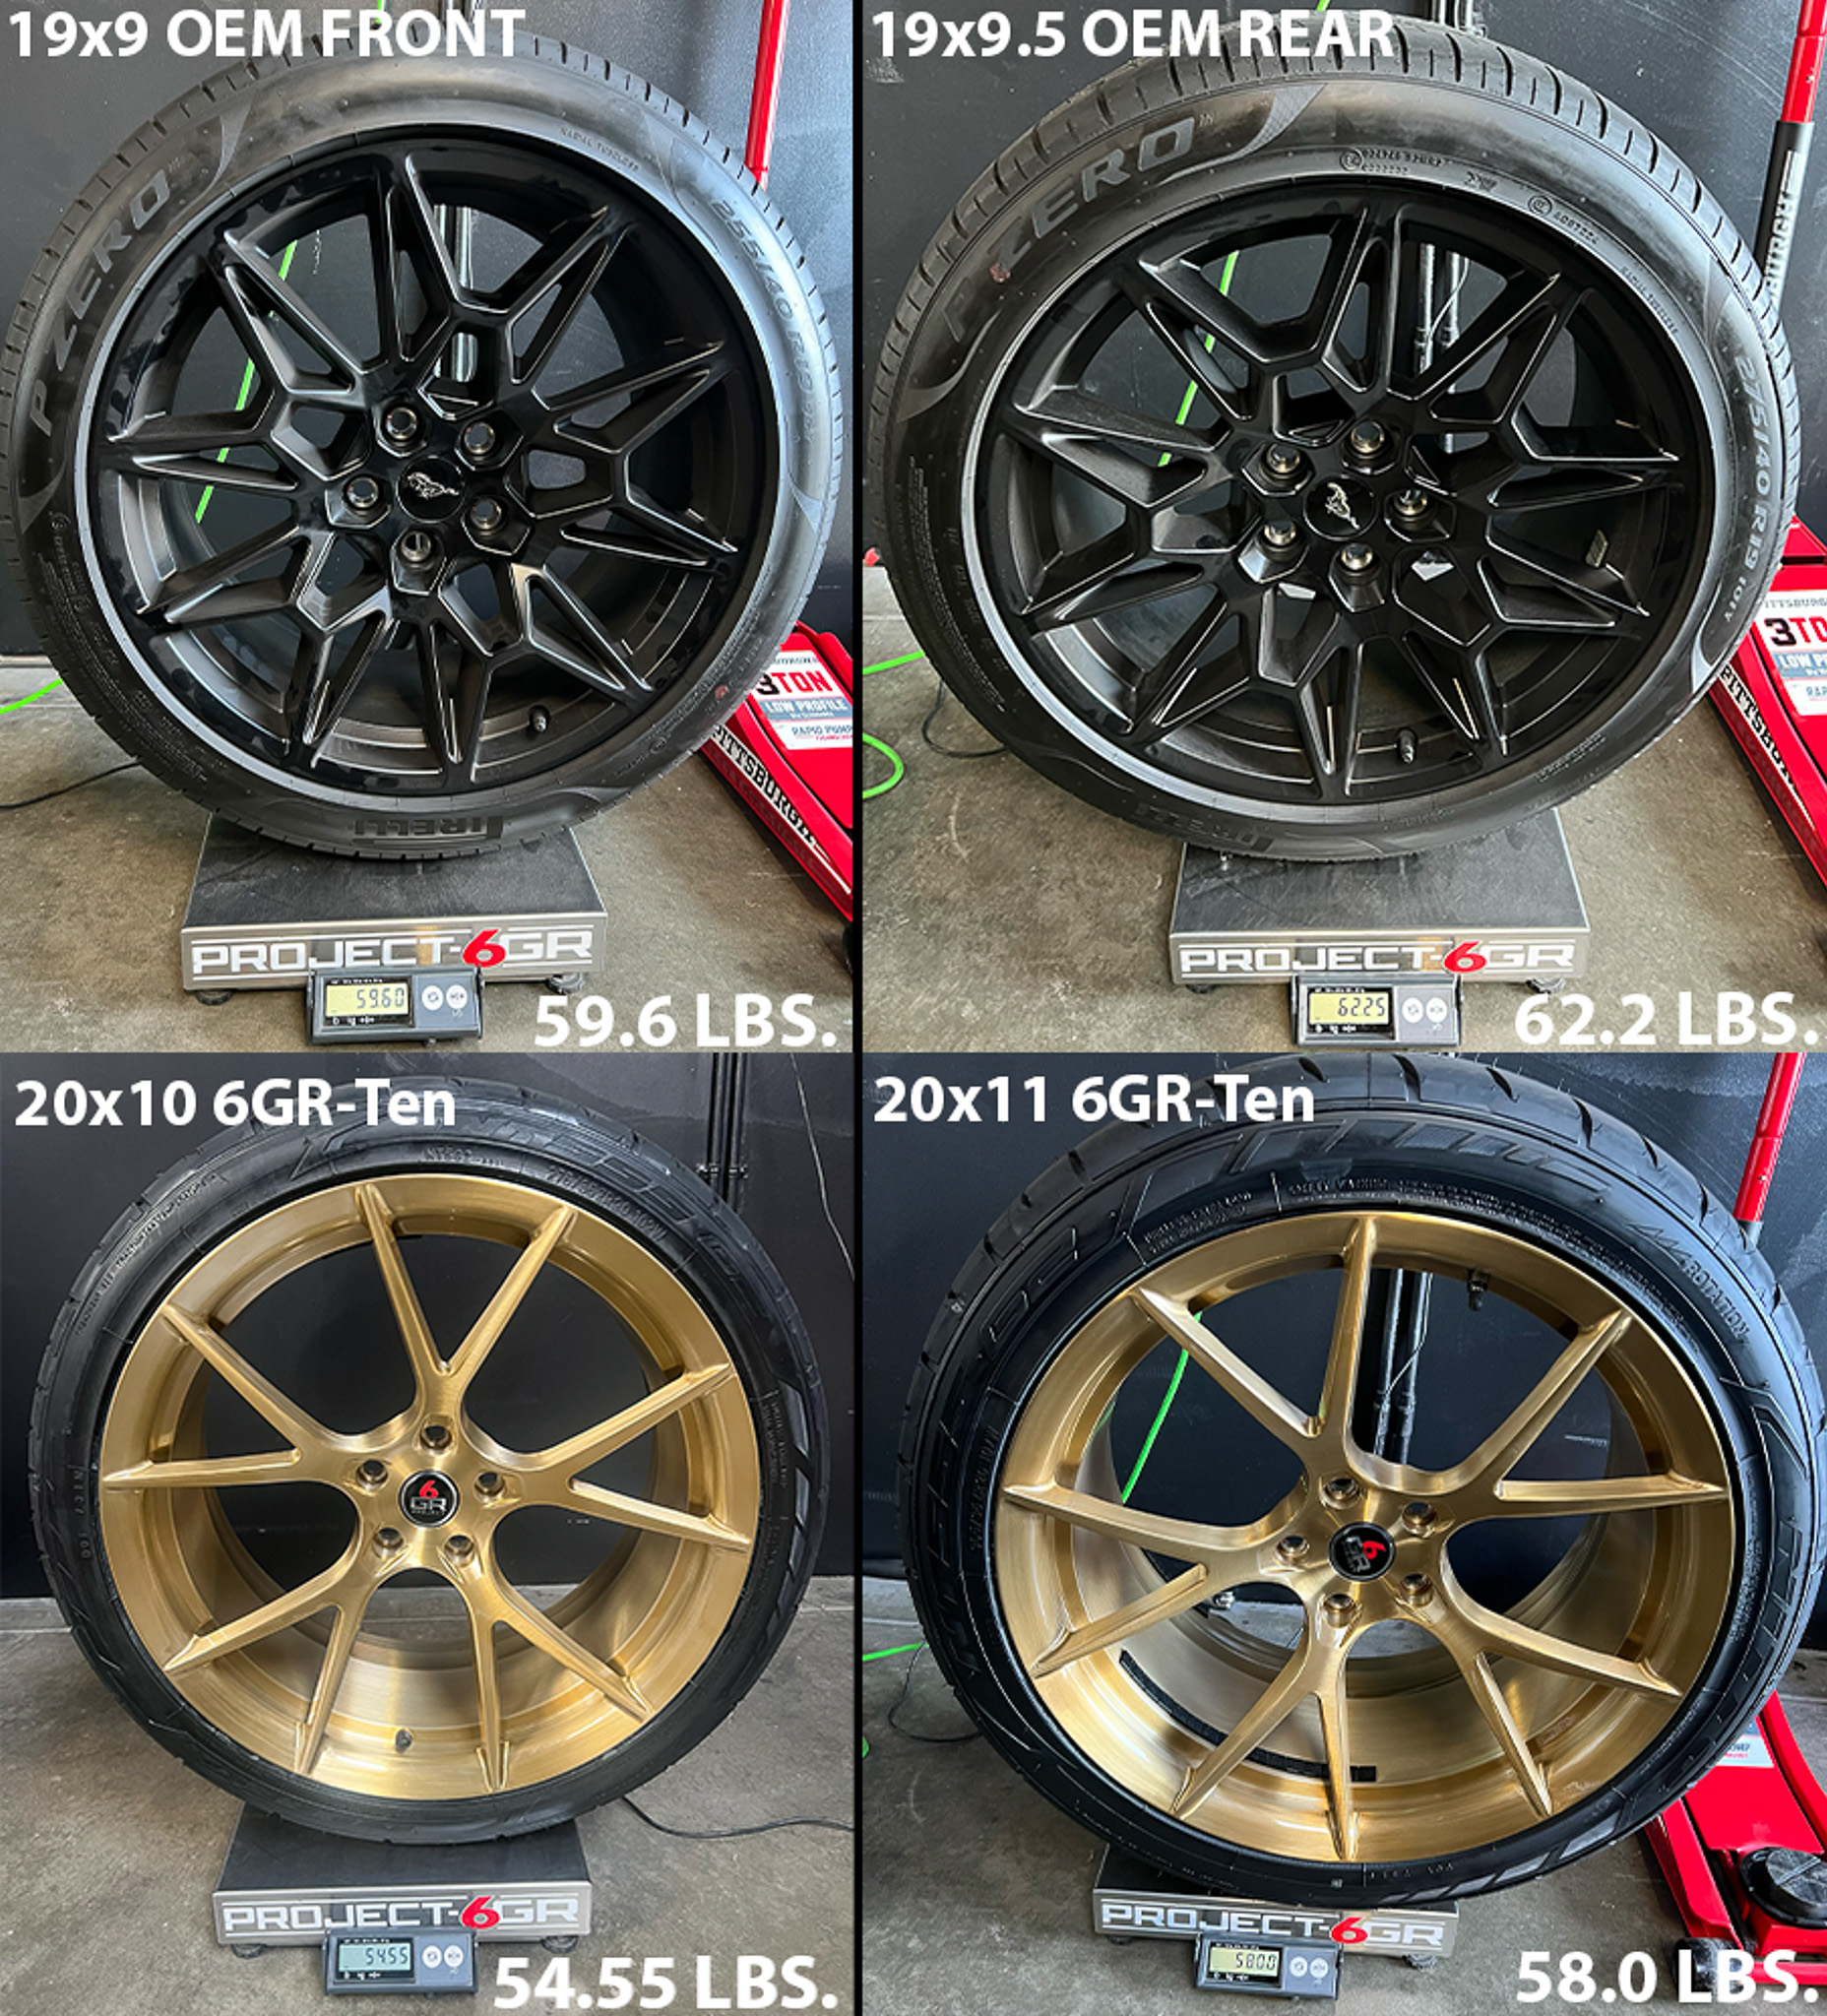 S650 Mustang Project6GR Wheels - Official Mustang S650 Aftermarket Wheel Thread Anything And Everything 6GR Wheels Related 6GR FORUM WEIGHT COMPARISON 